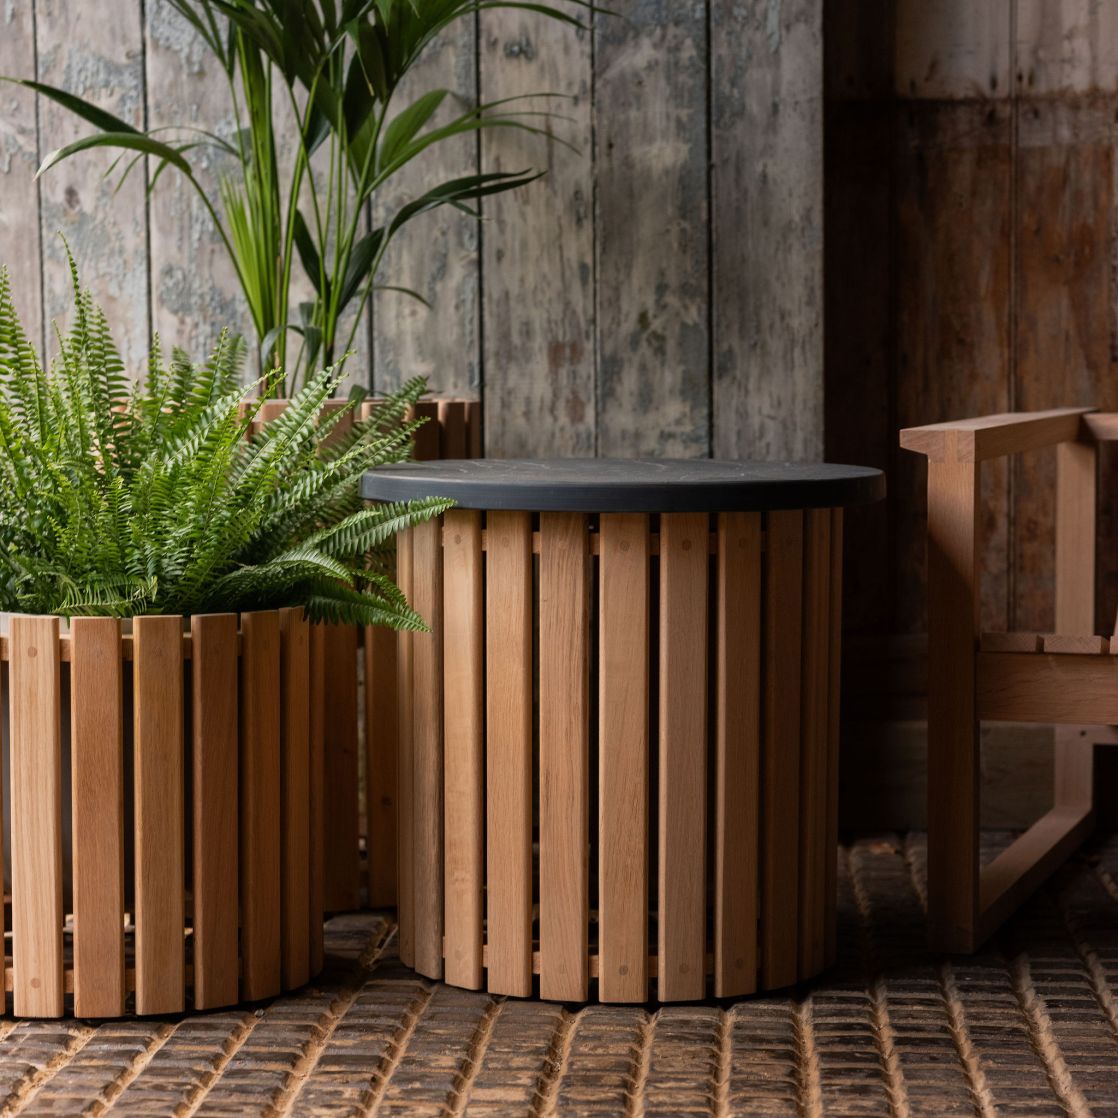 wooden planters and wooden chair